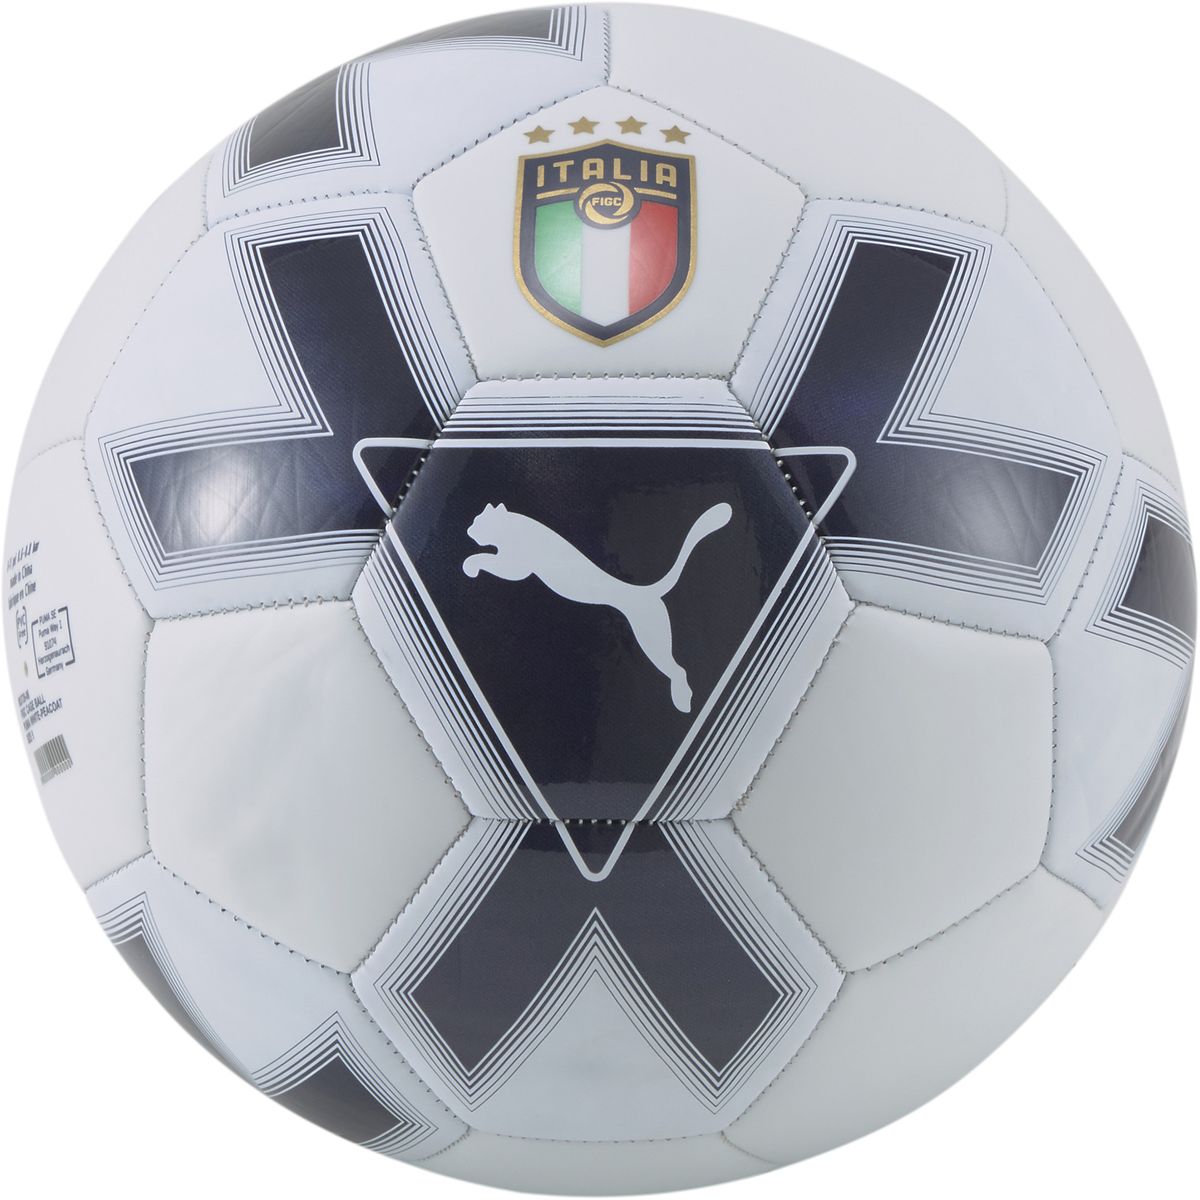 Puma Figc Cage Ball Outdoor-Fußball